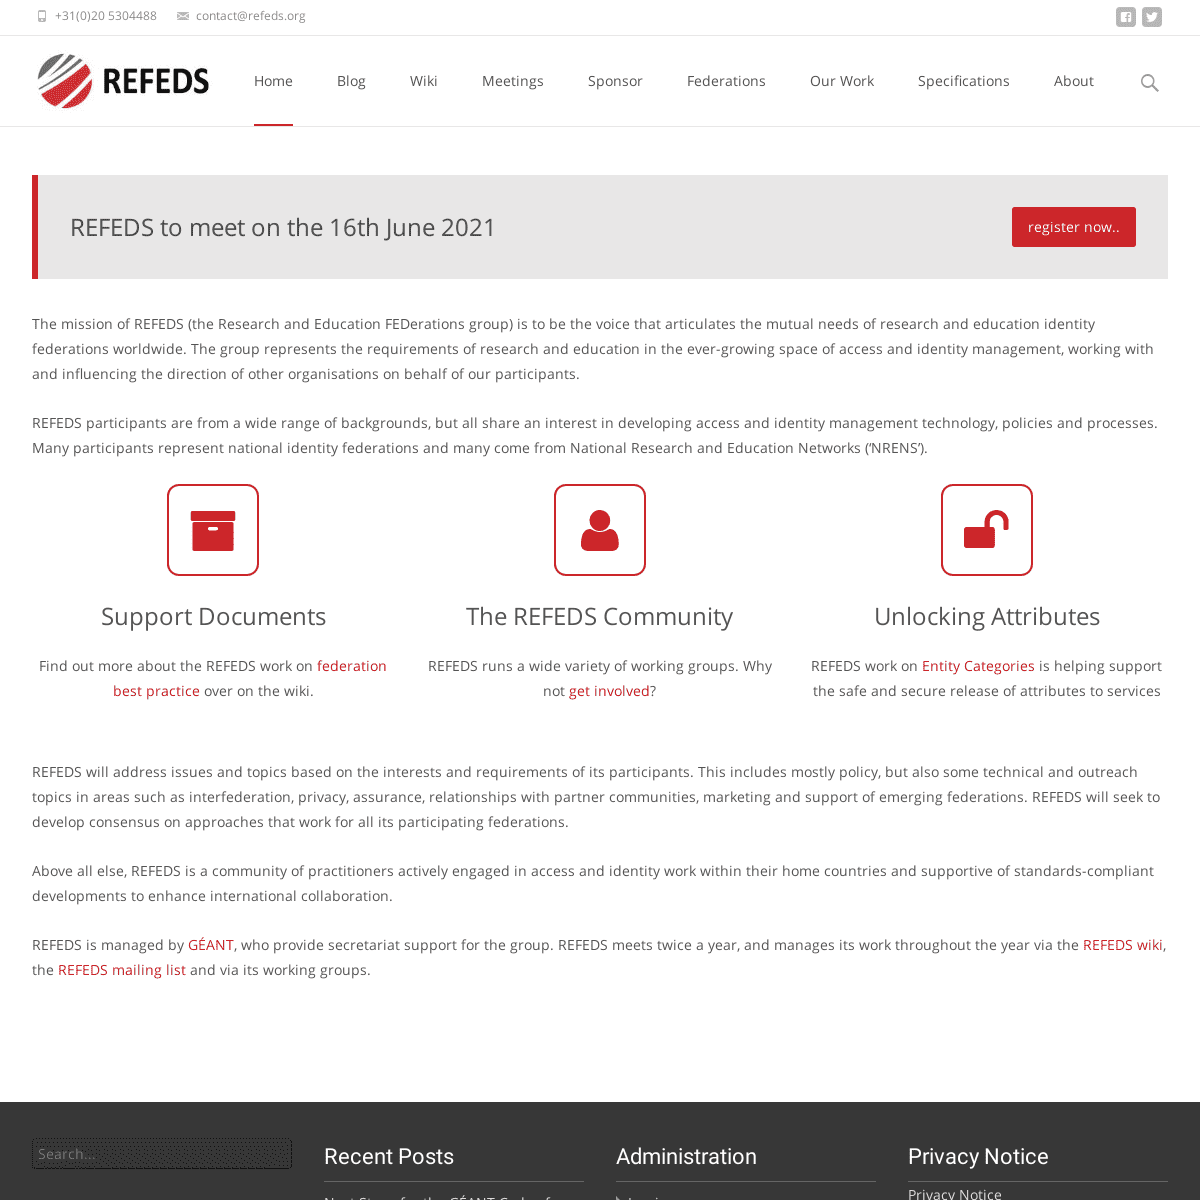 A complete backup of https://refeds.org